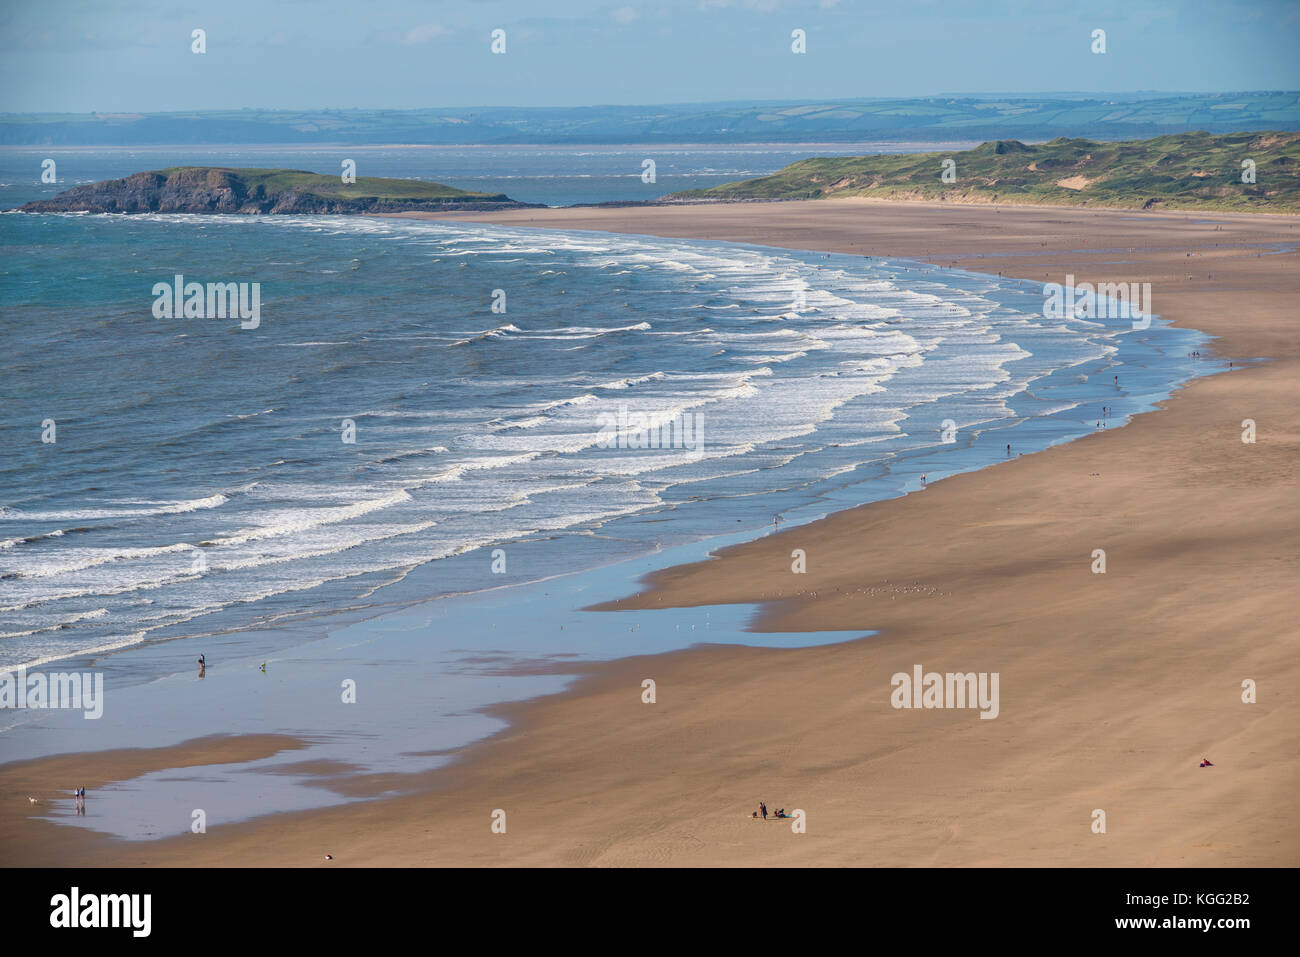 Gower, Wales. The beauty of the coast with Rhossili Beach and The Worm's Head. A natural paradise that it would be hard to beat. Great vistas. Stock Photo